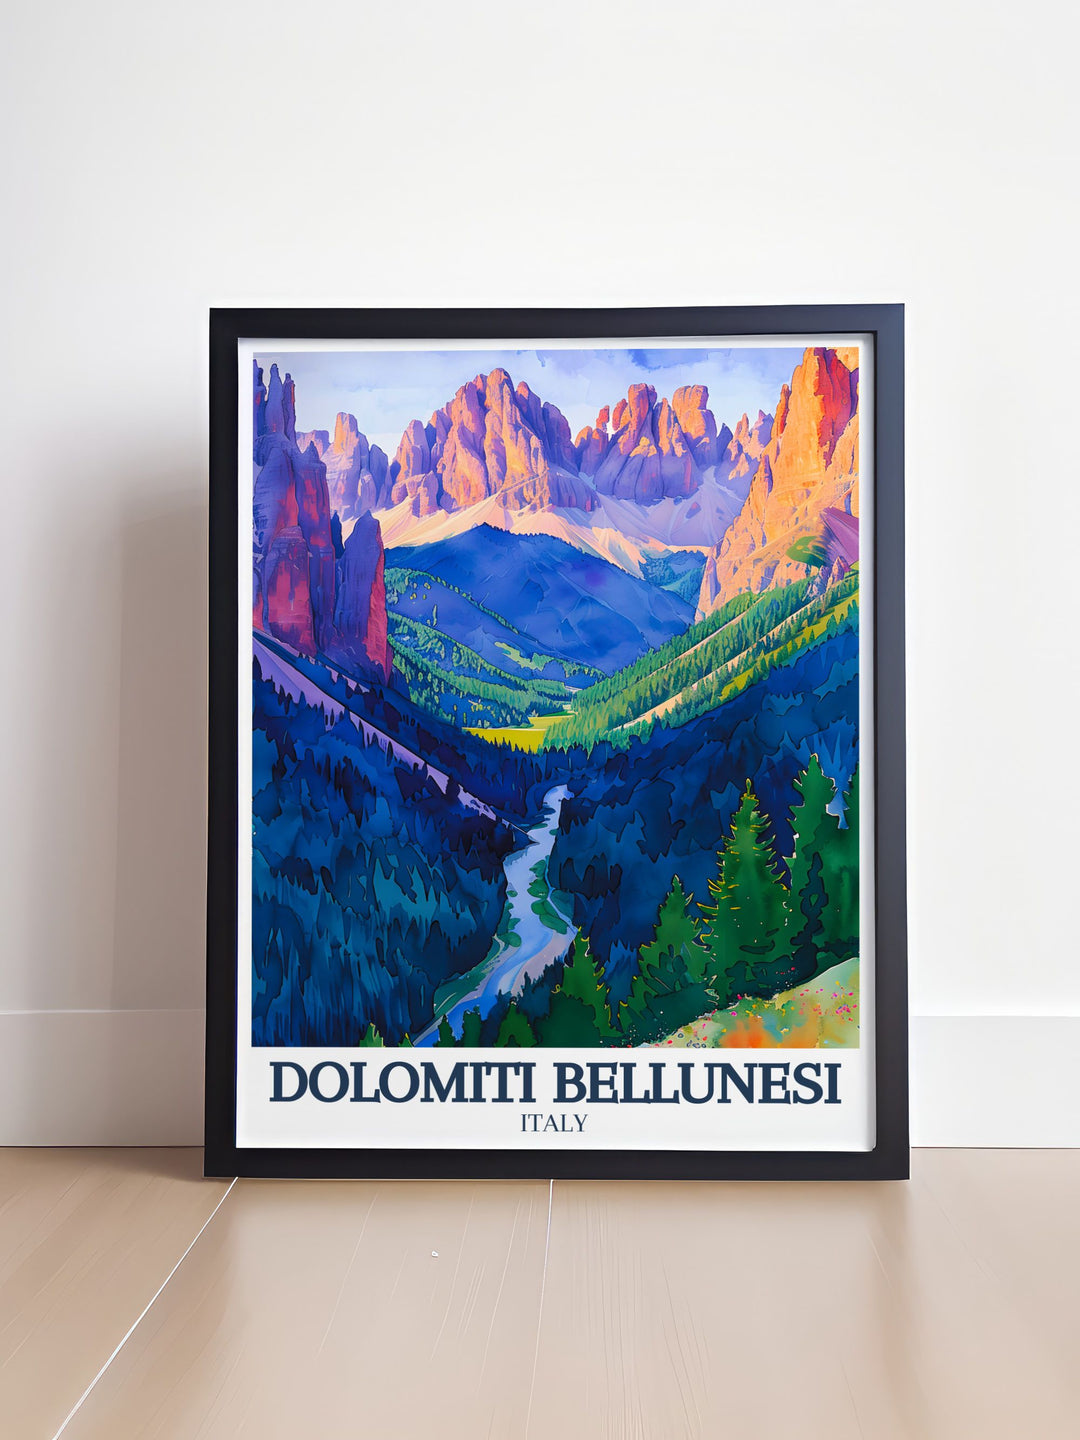 Dolomite range wall art print featuring the serene and picturesque views of the Dolomiti Bellunesi perfect for creating an atmosphere of adventure and tranquility in your living space.